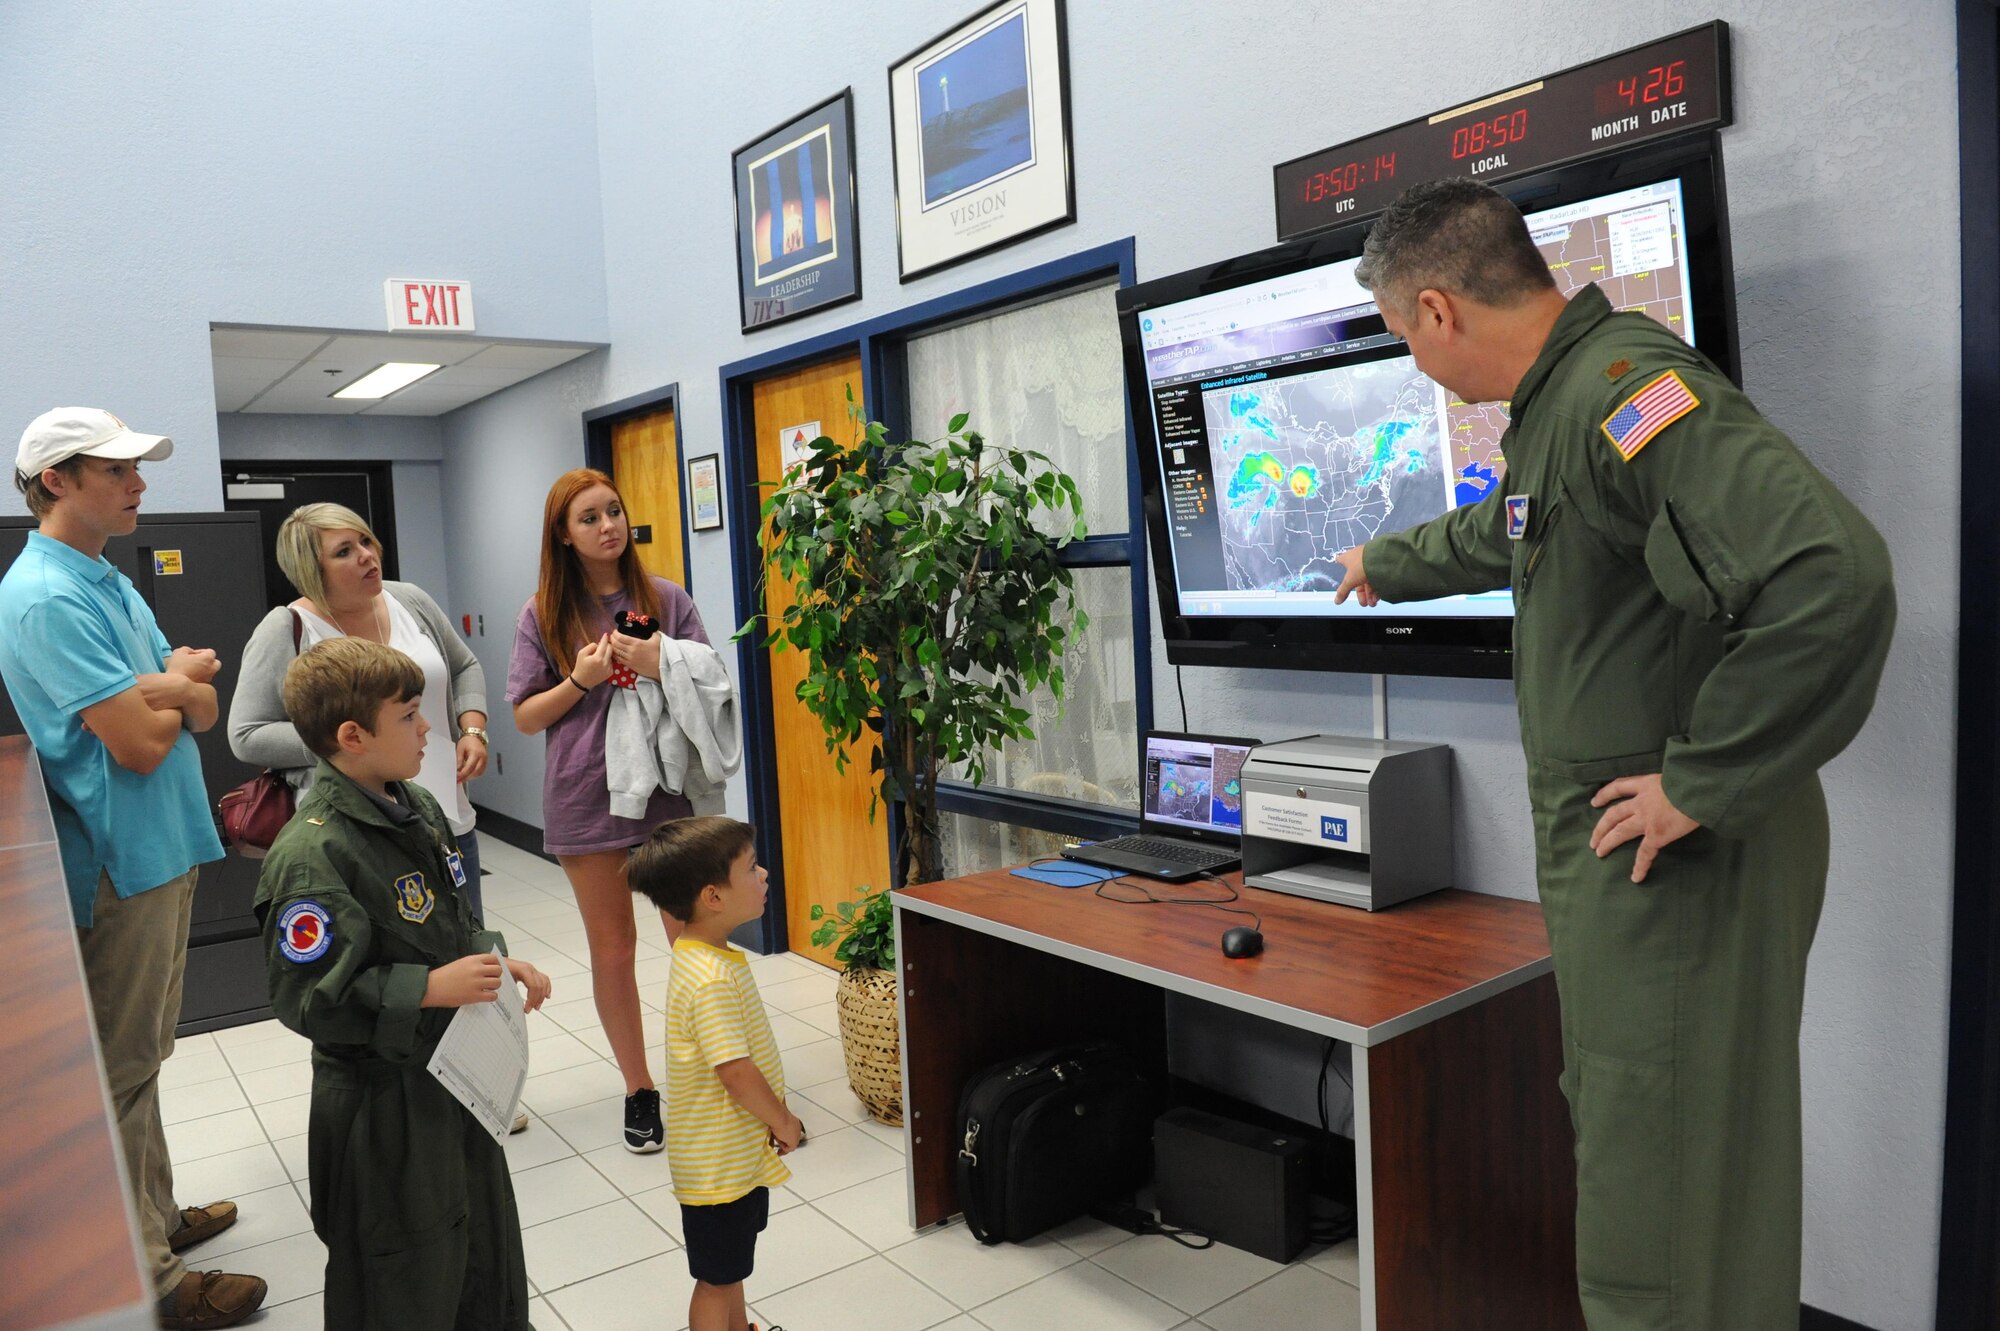 Maj. Jerry Rutland, 403rd Wing chief pilot, provides a weather update to Jon Bryant “JB” Orso at base operations during the 403rd Wing’s first Pilot for a Day event April 26, 2016, Keesler Air Force Base, Miss. Orso, who served as an honorary Air Force Reserve second lieutenant, is in remission after receiving treatment for Acute Lymphoblastic Leukemia. Pilot for a Day is a community outreach program for children who live with a chronic or life-threatening disease or illness. (U.S. Air Force photo by Kemberly Groue)